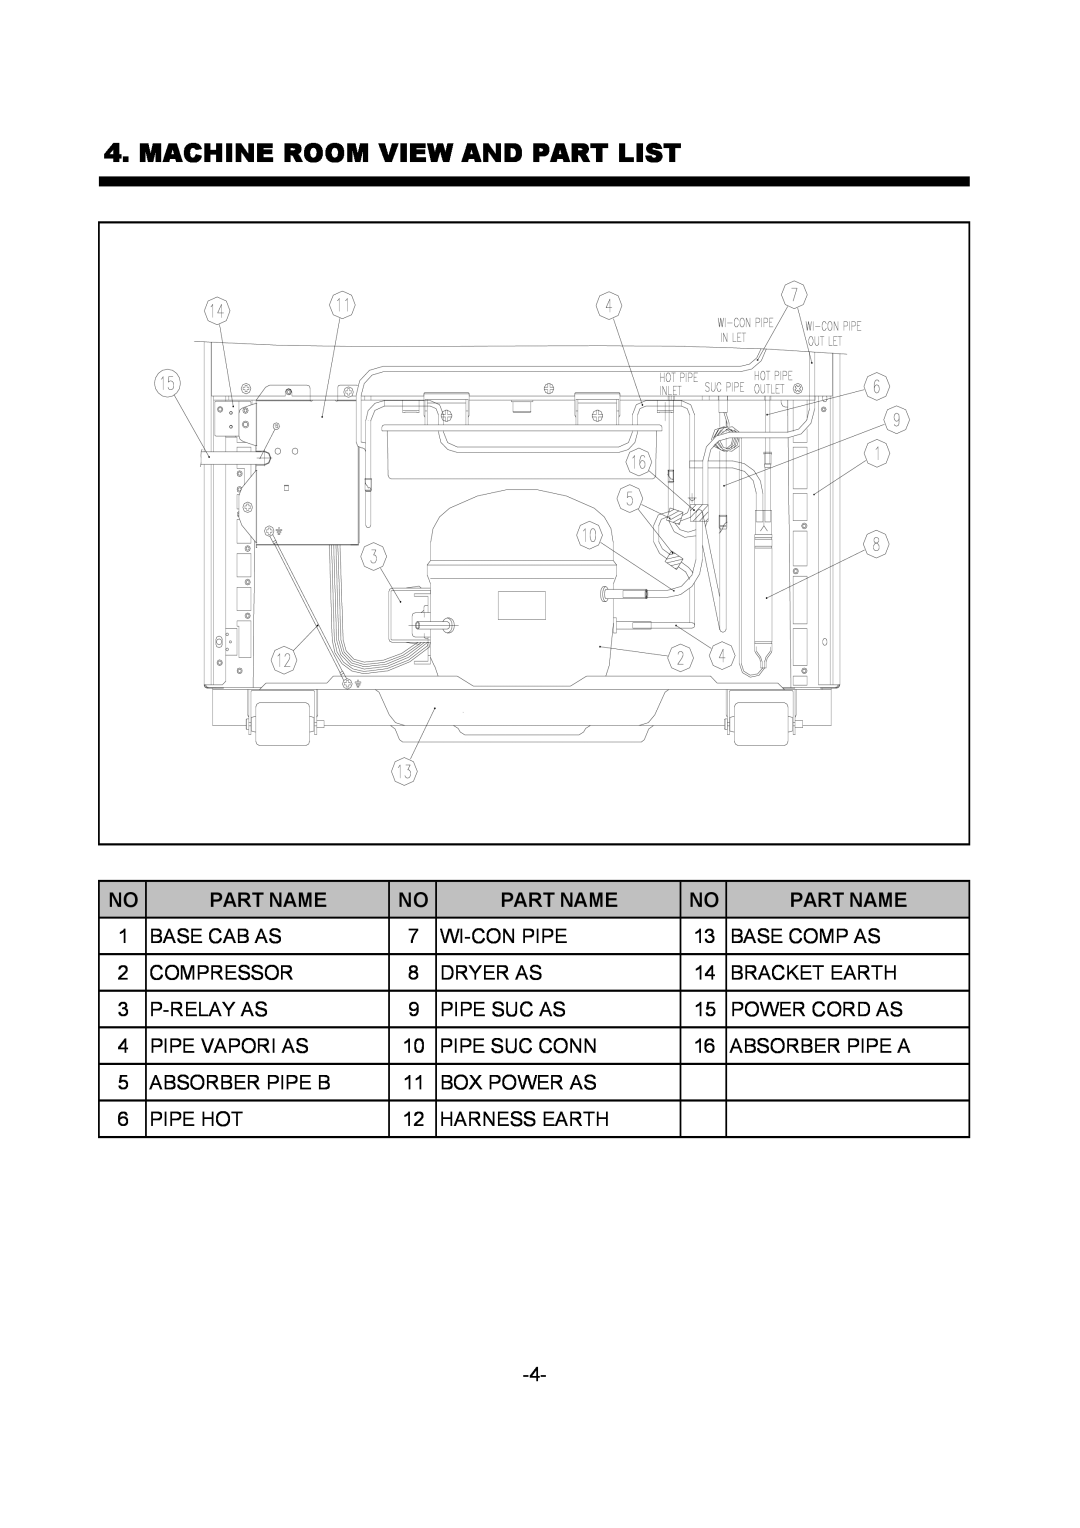 Daewoo FR-330 service manual Machine Room View And Part List, Part Name 